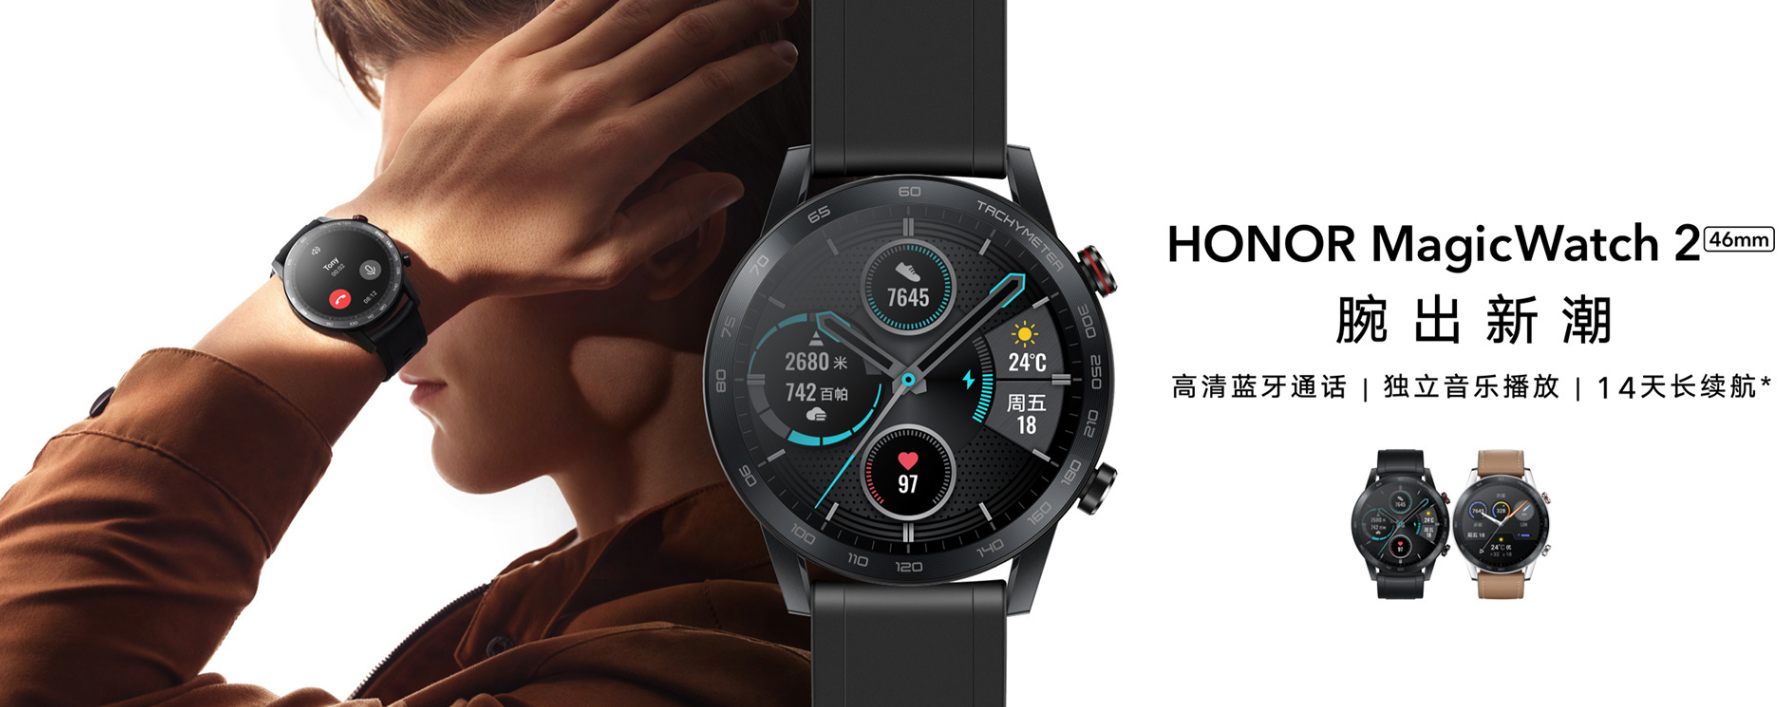 Honor Magic Watch 2 featured